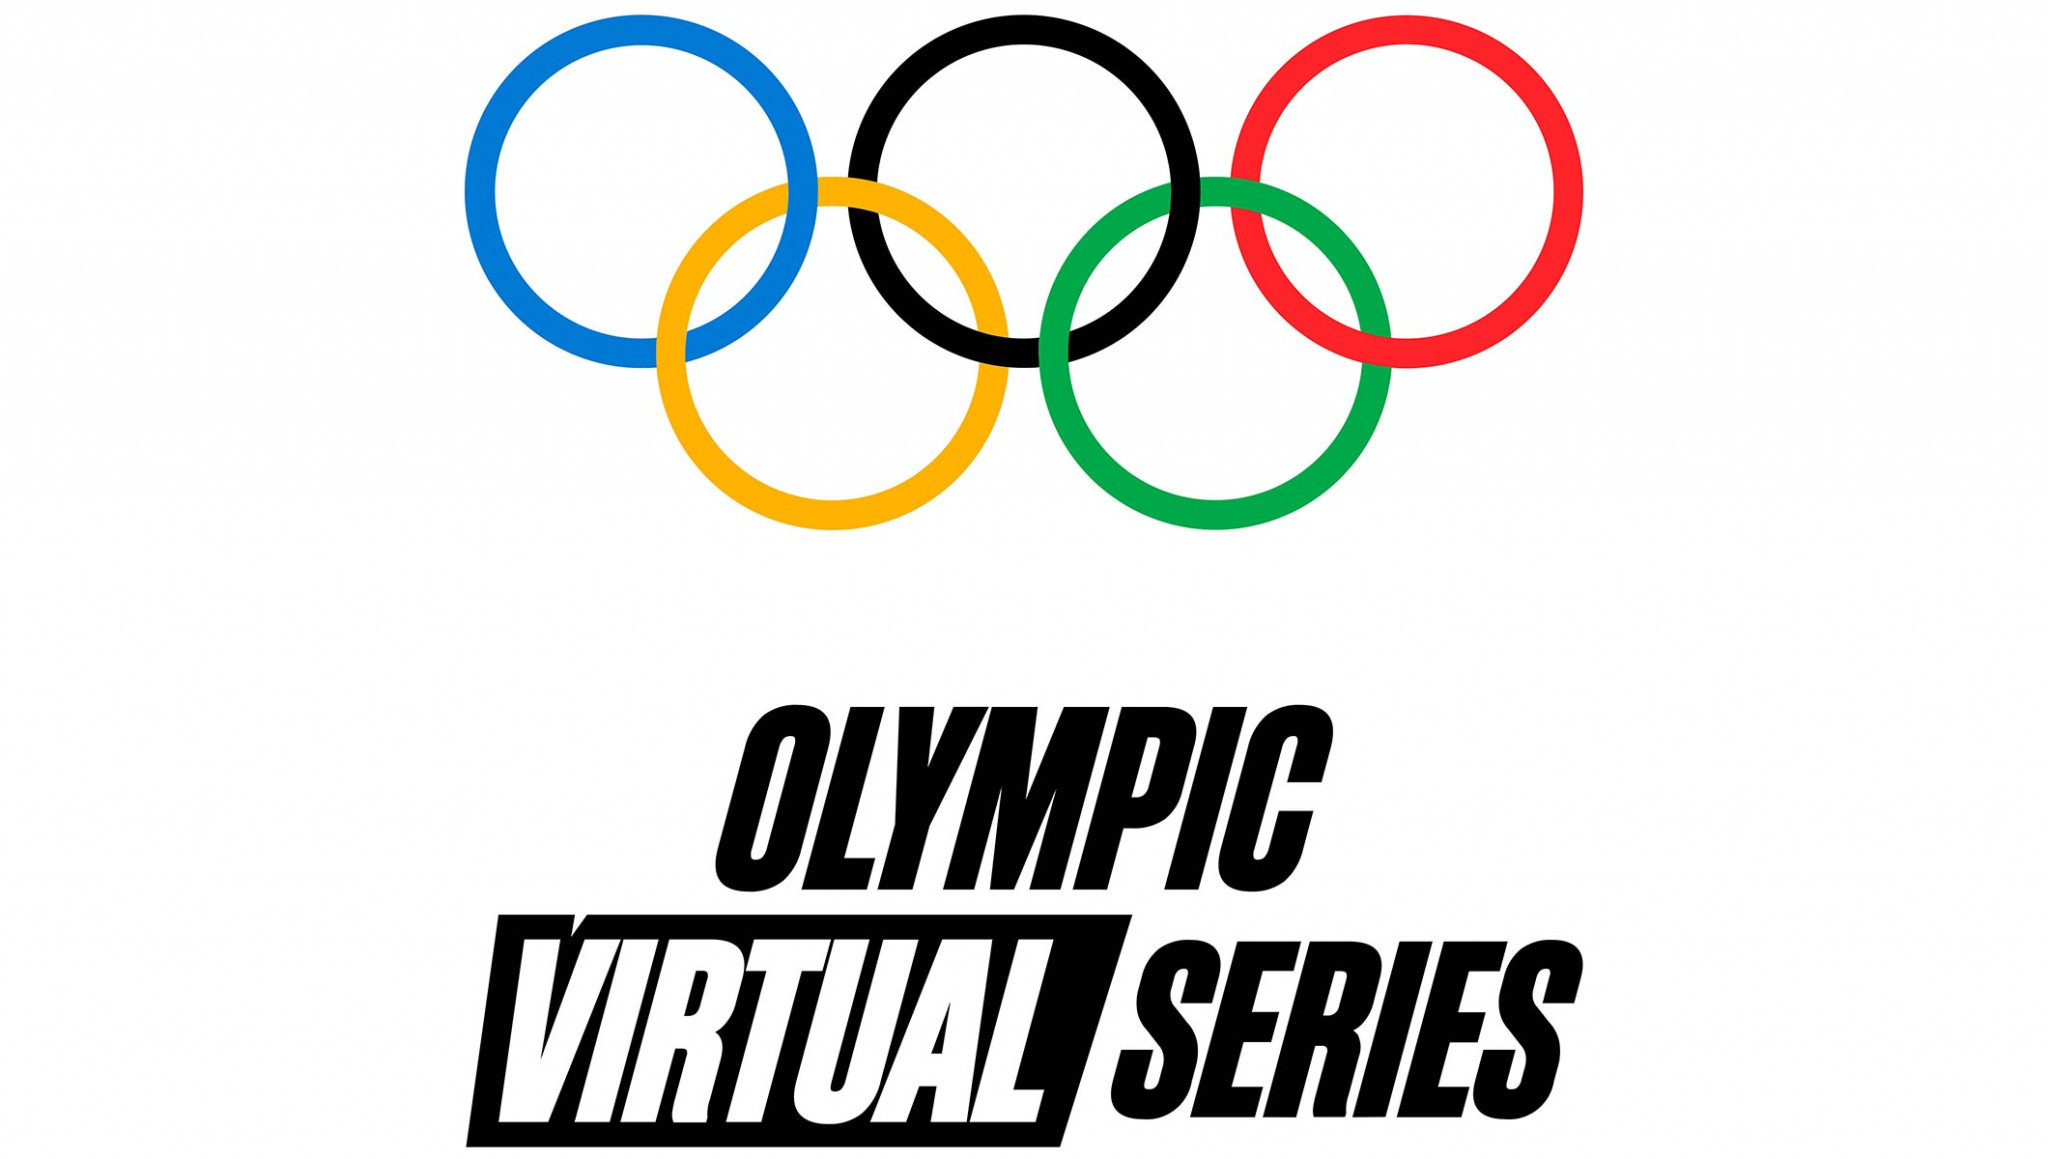 IOC makes biggest esports statement yet with launch of Olympic Virtual Series